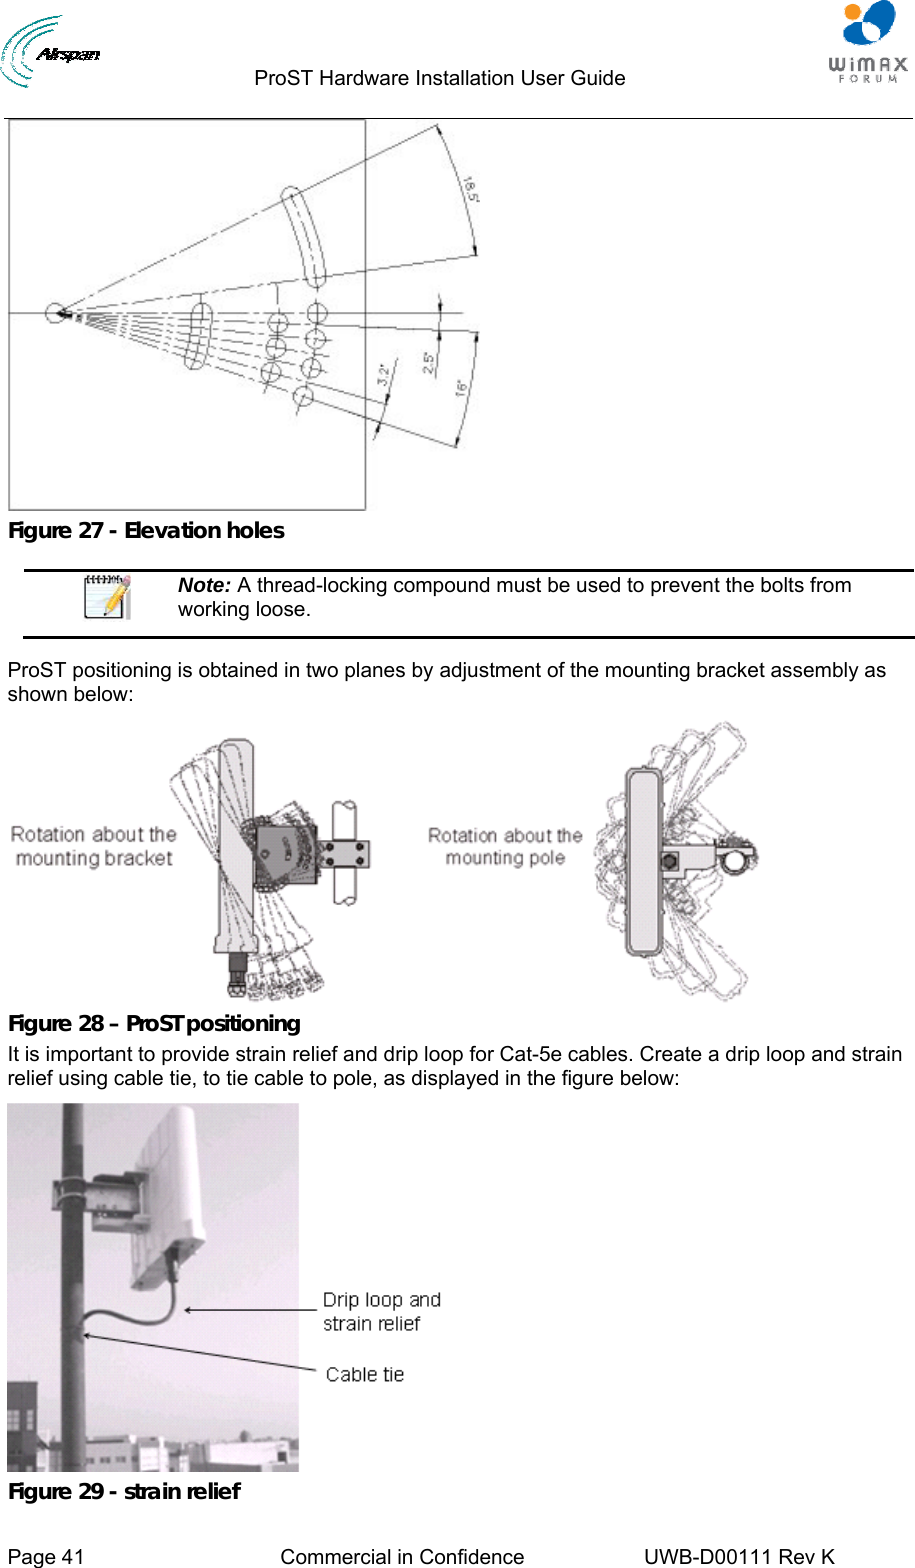                                  ProST Hardware Installation User Guide     Page 41  Commercial in Confidence  UWB-D00111 Rev K    Figure 27 - Elevation holes   Note: A thread-locking compound must be used to prevent the bolts from working loose.  ProST positioning is obtained in two planes by adjustment of the mounting bracket assembly as shown below:  Figure 28 – ProST positioning It is important to provide strain relief and drip loop for Cat-5e cables. Create a drip loop and strain relief using cable tie, to tie cable to pole, as displayed in the figure below:  Figure 29 - strain relief 